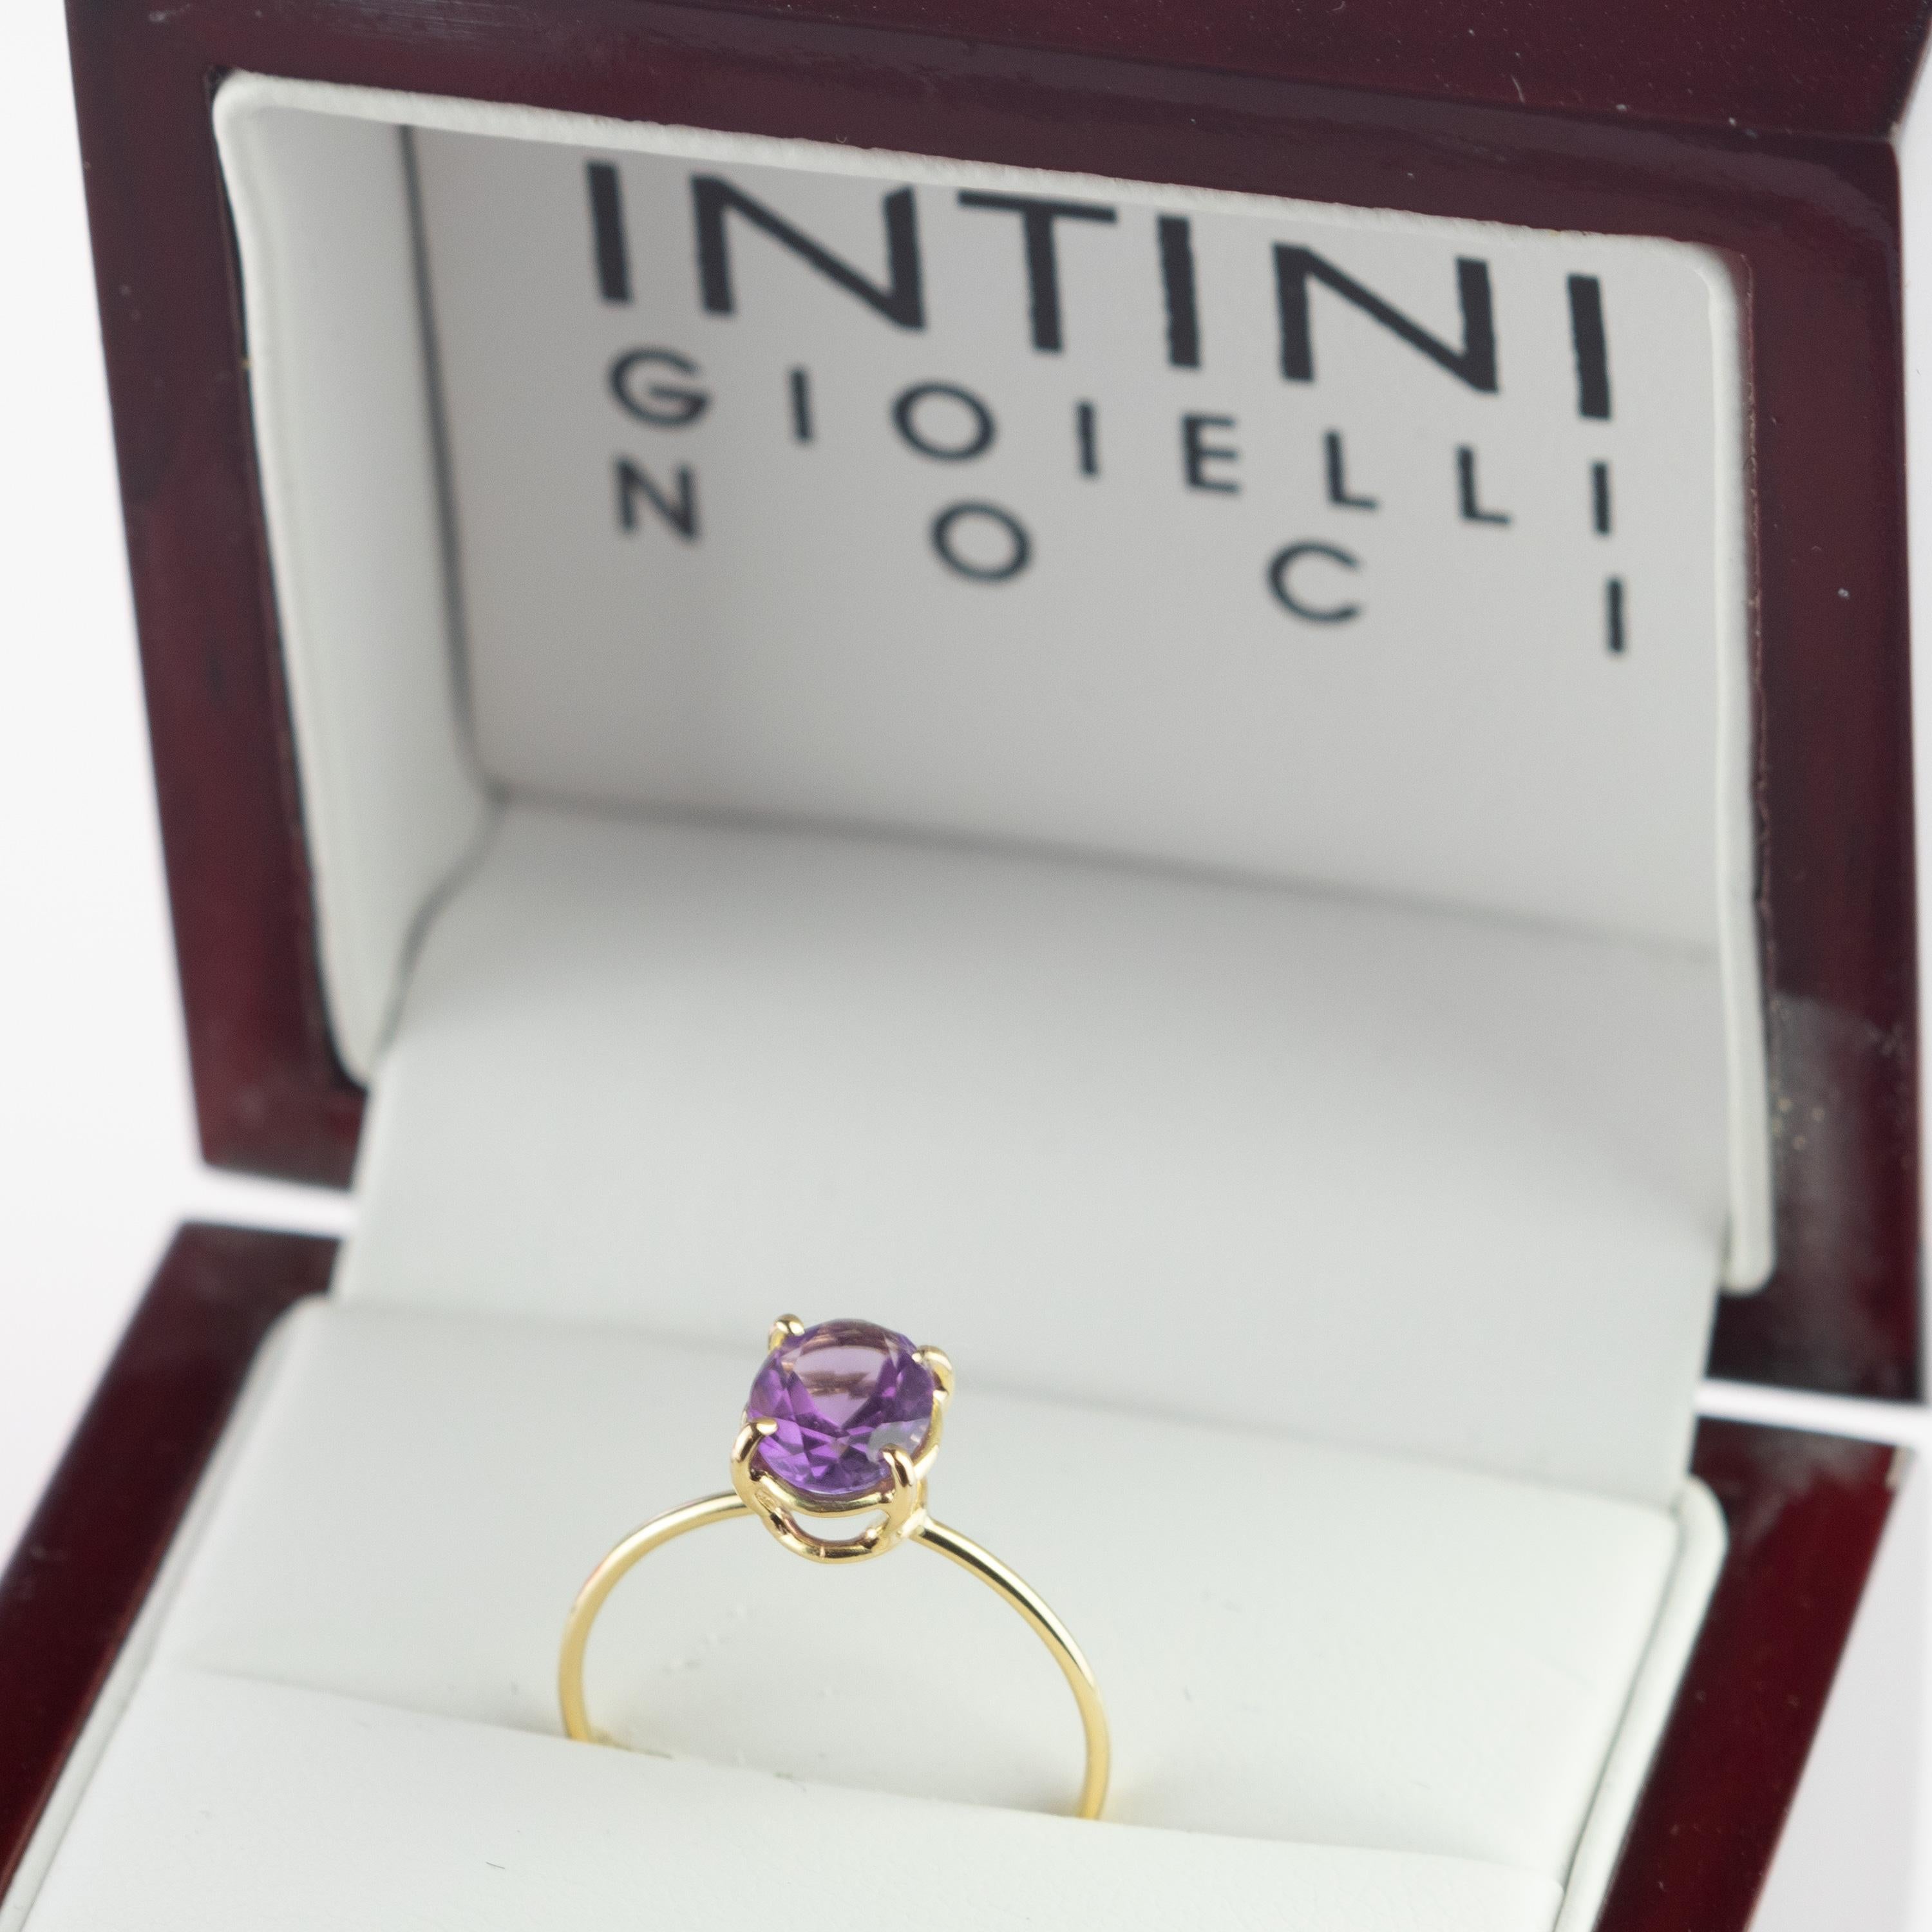 Rare and magnificent natural amethyst surrounded by a mixed 18 k yellow gold ring.

This royal jewel is inspired by the power of the stones, the amethyst with a deep purple color represents the passion and internal beast that we all carry inside.